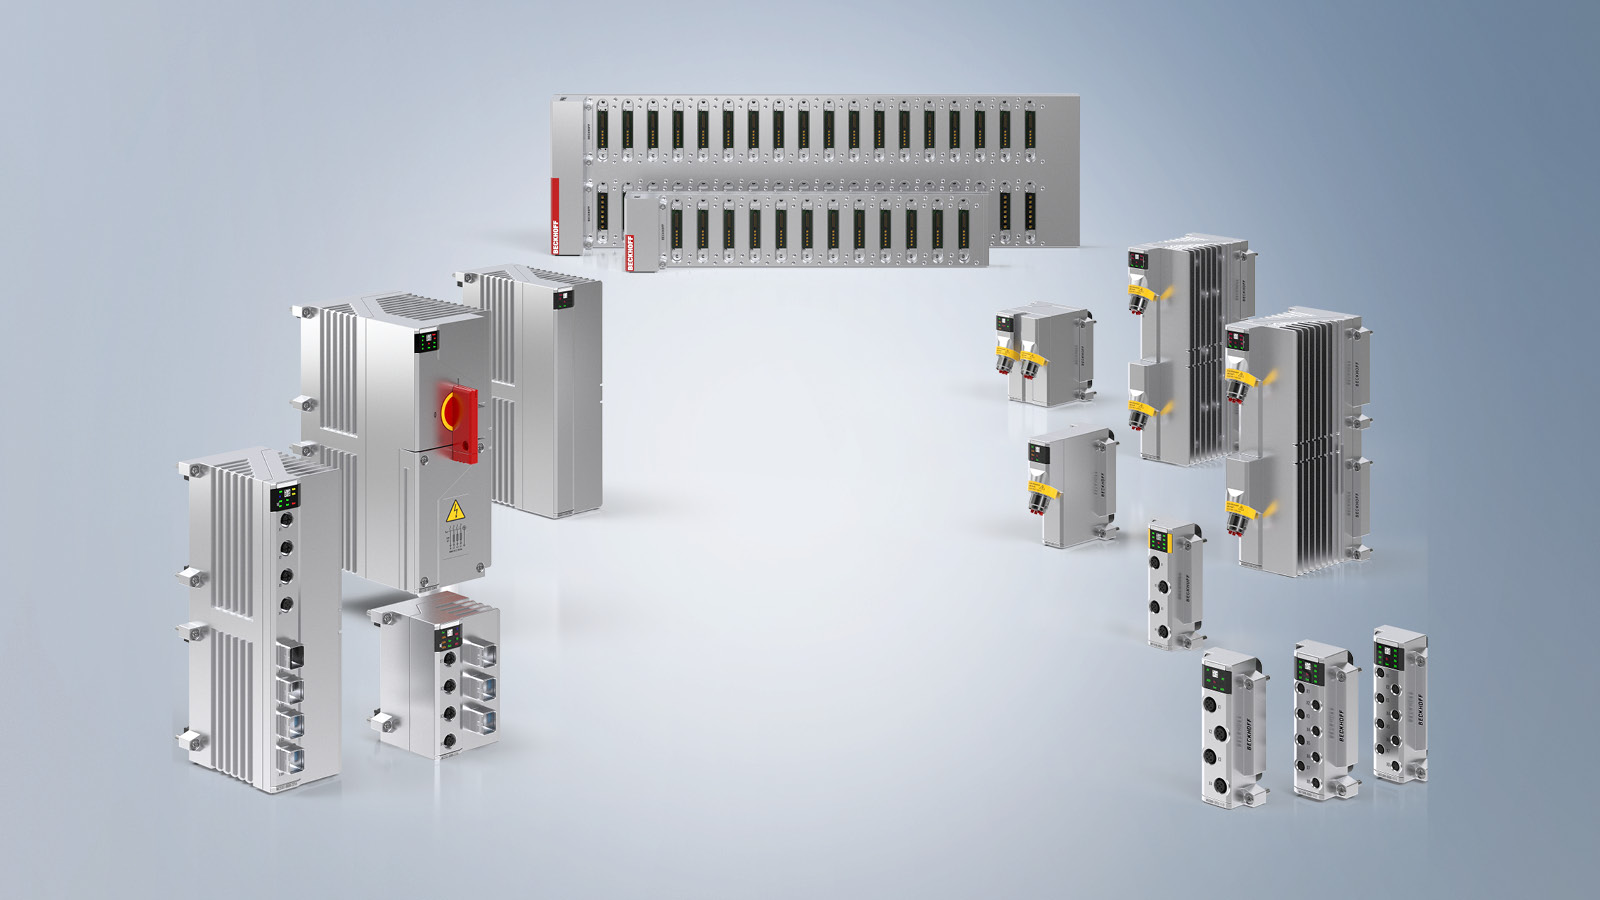 The MX-System is highly modular and can be optimally adapted to the application at hand with a wide range of function modules. 